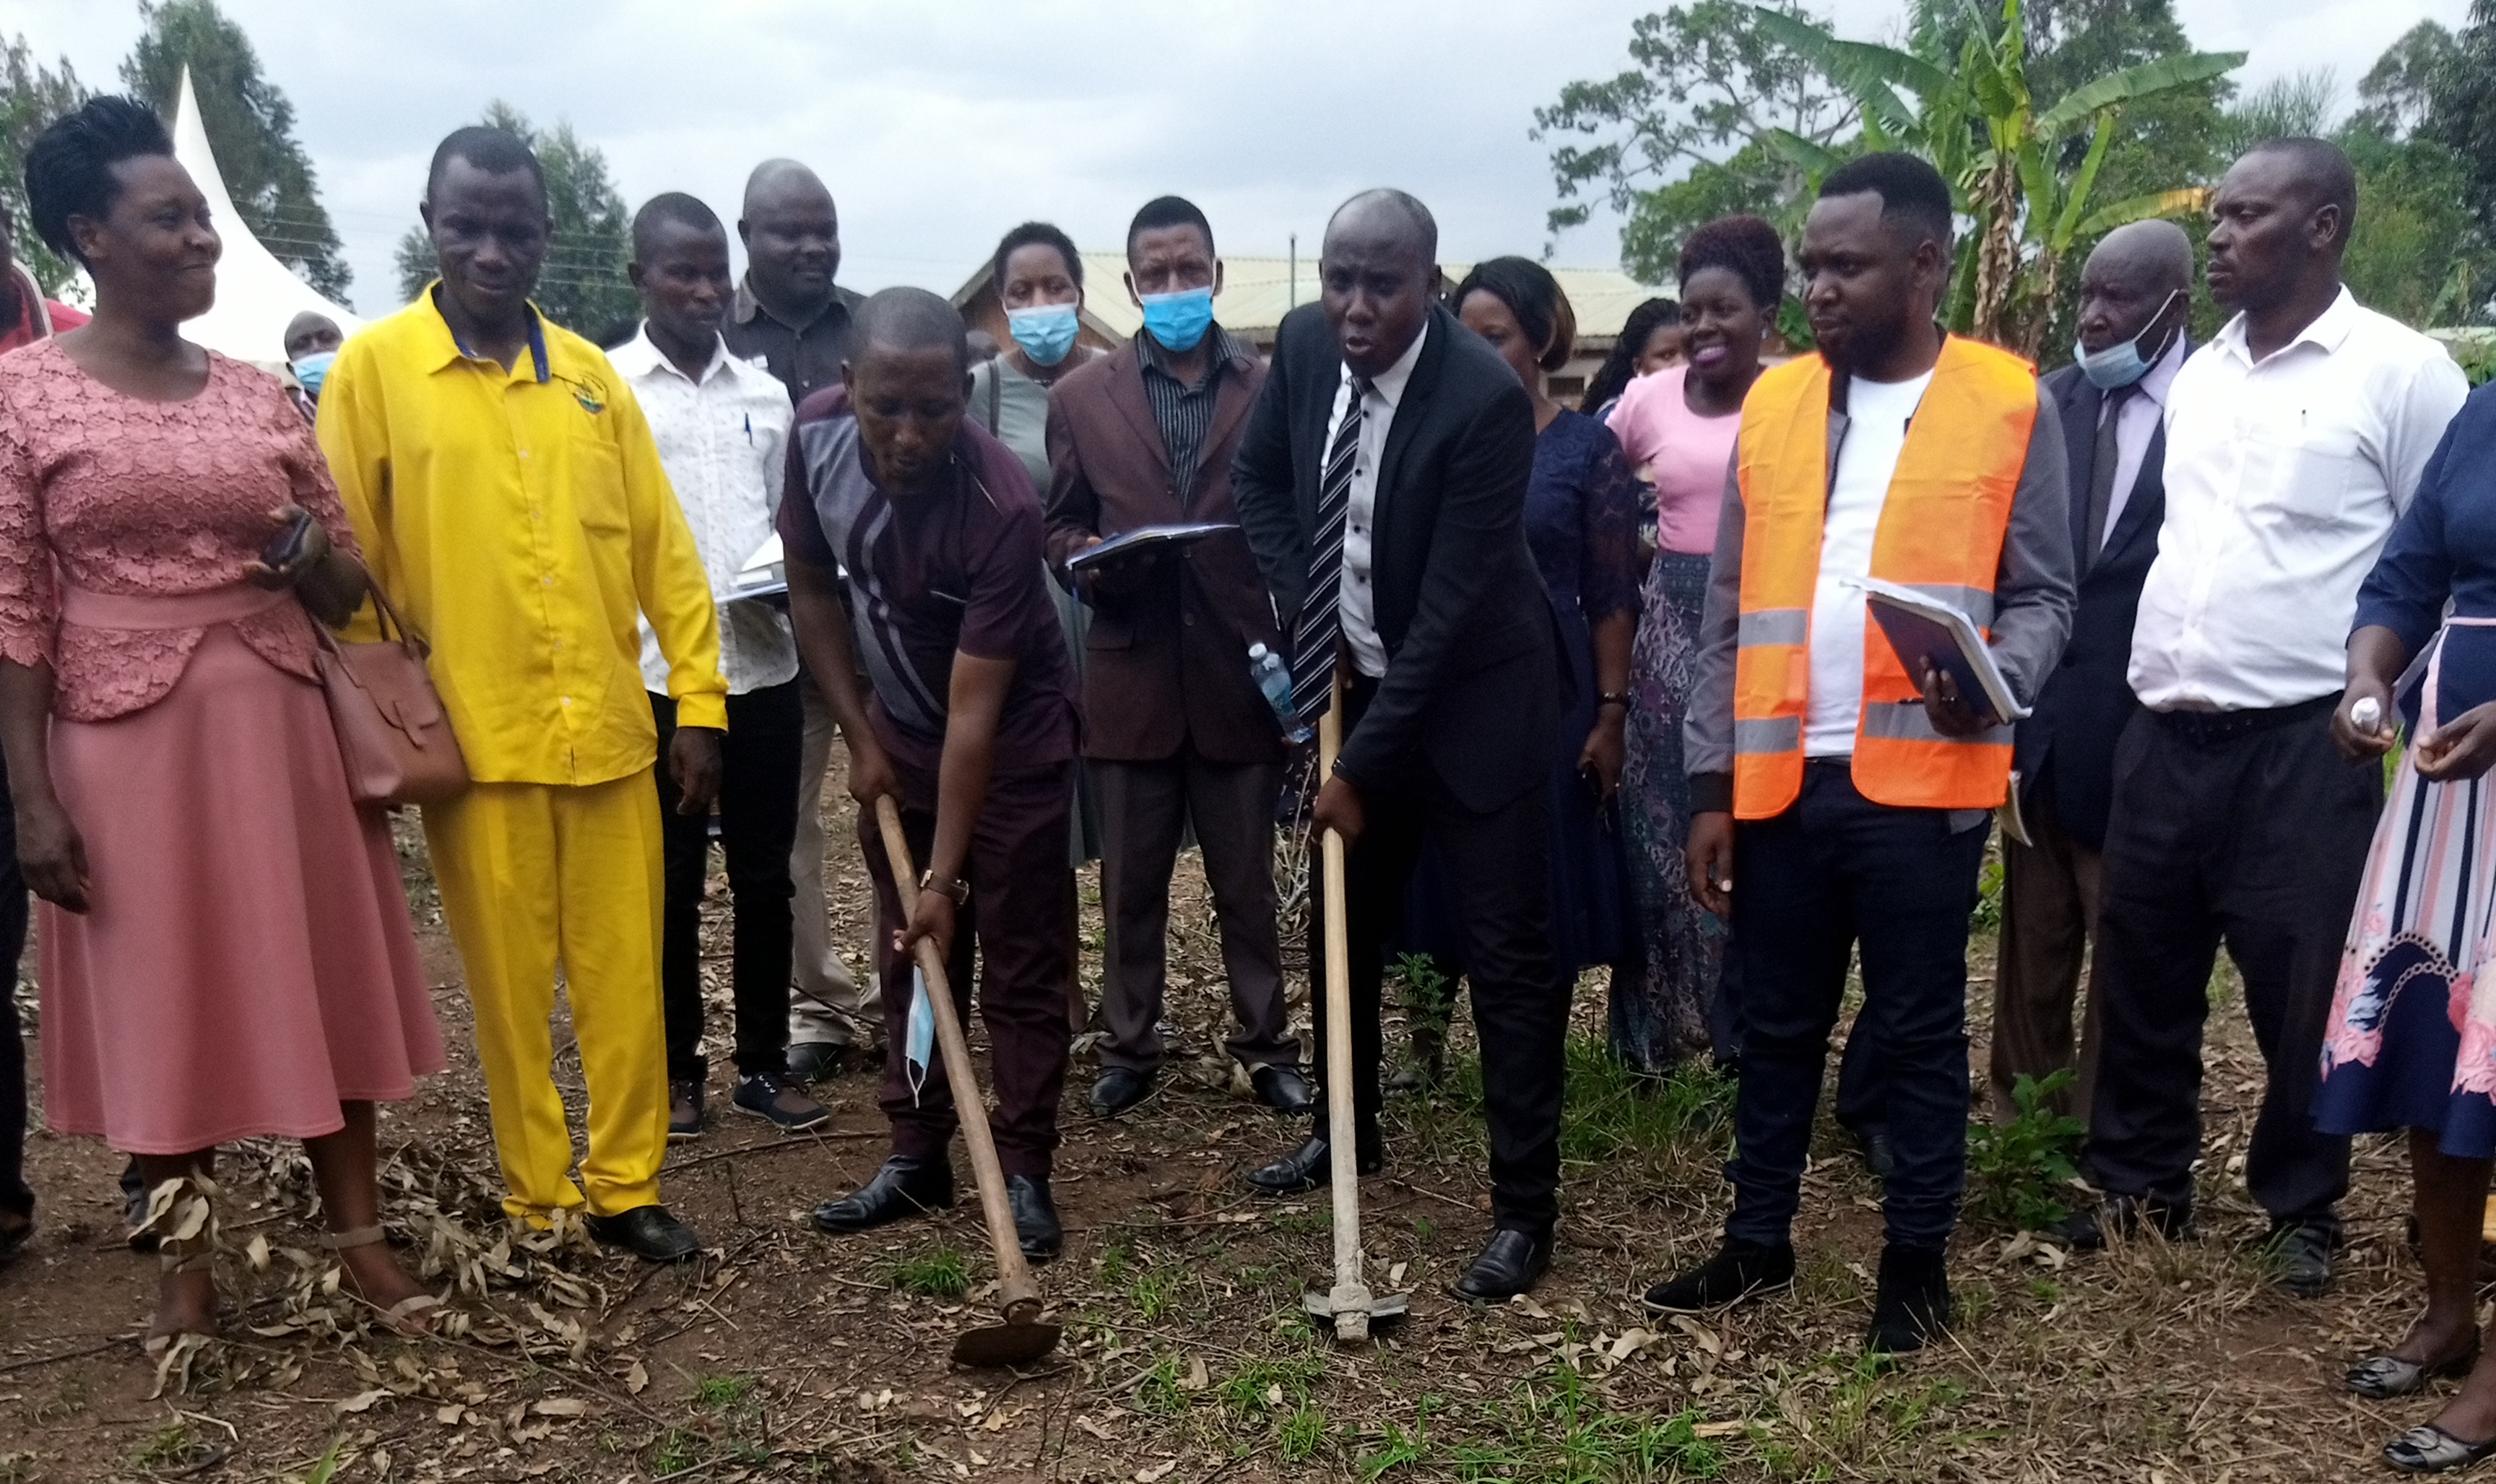 Ground breaking ceremony for the construction of a general ward at Kiyuni health centre iii worth 200m Uganda shillings